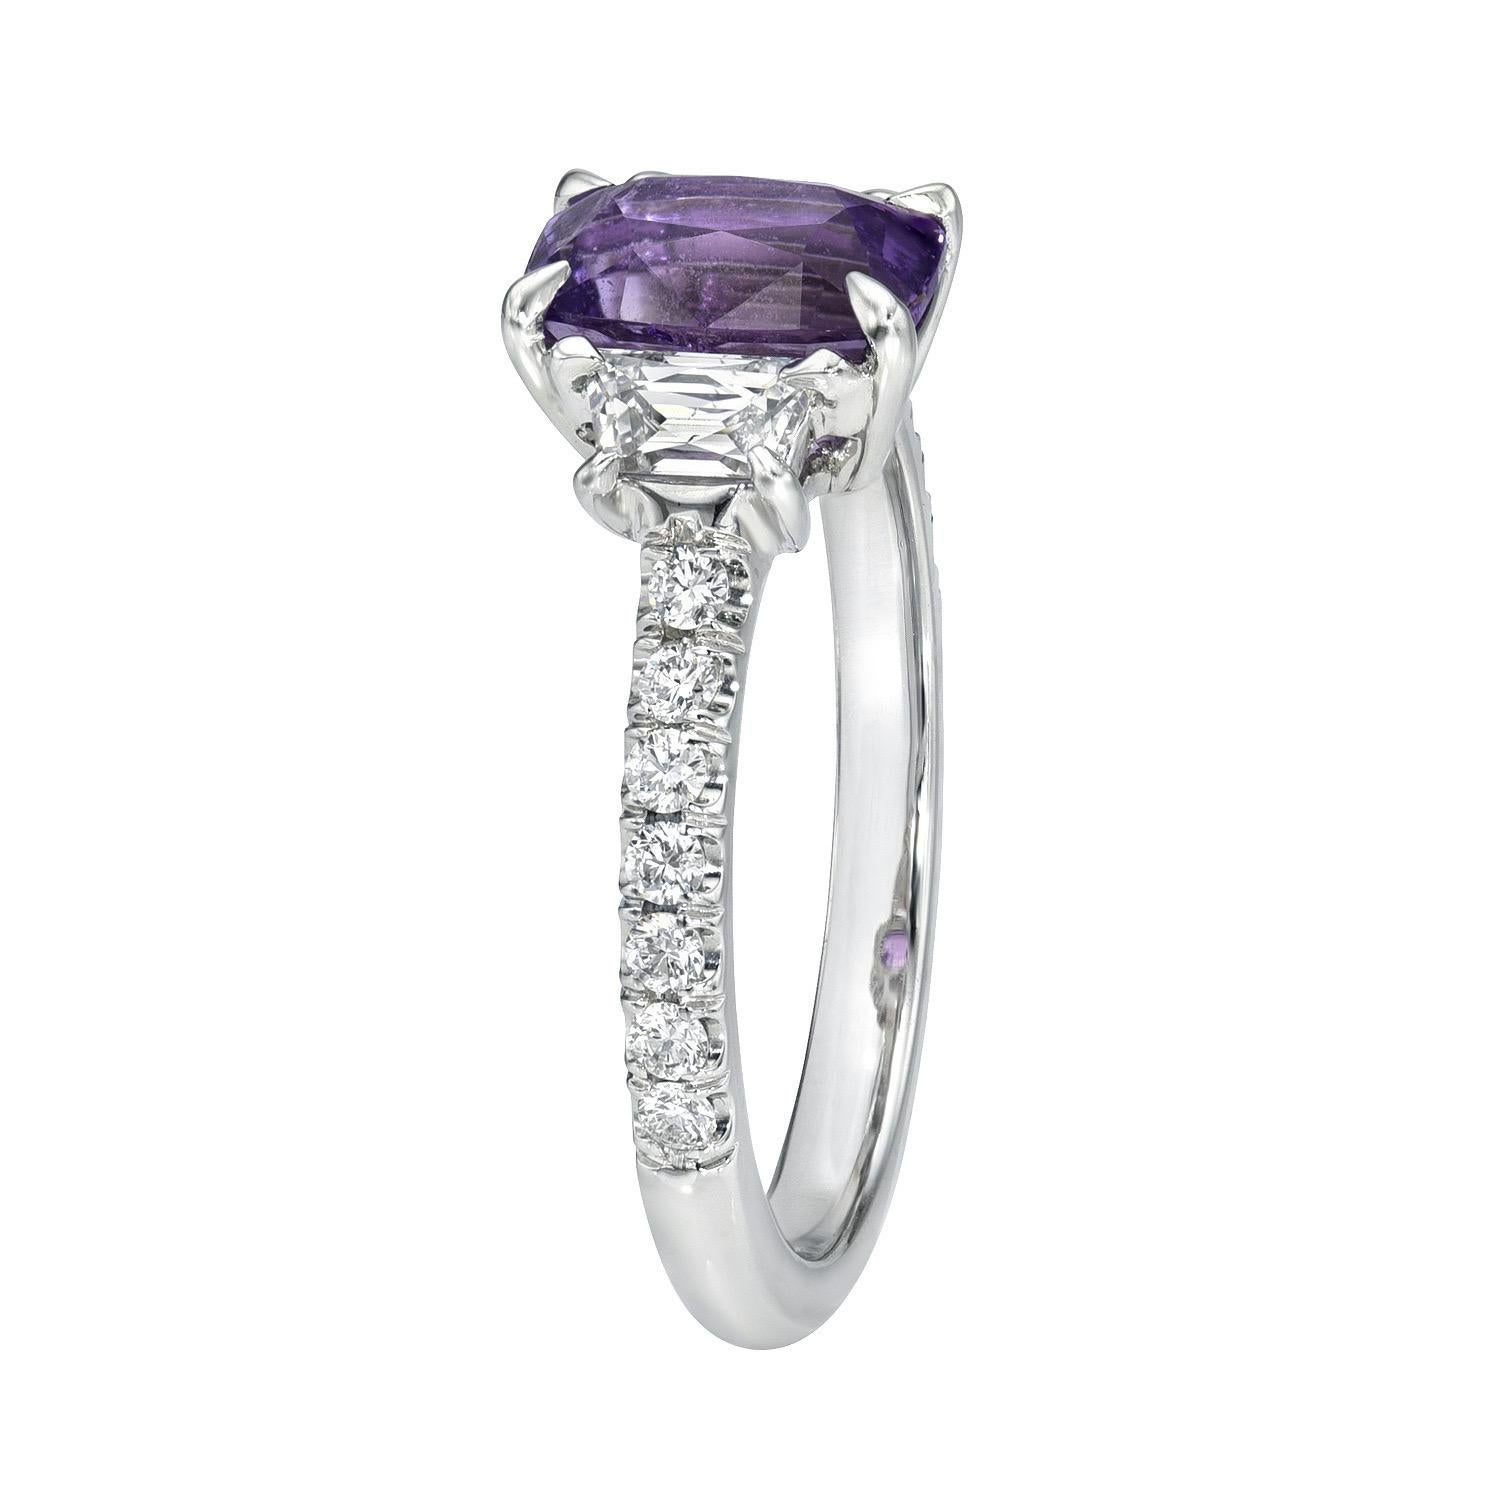 Striking 1.60 carat unheated Purple Sapphire cushion, three stone platinum ring, flanked by a pair of 0.32 carat, H/SI1 French cut Trapezoid diamonds and a total of 0.19 carats of round brilliant diamonds
Ring size 6. Resizing is complementary upon